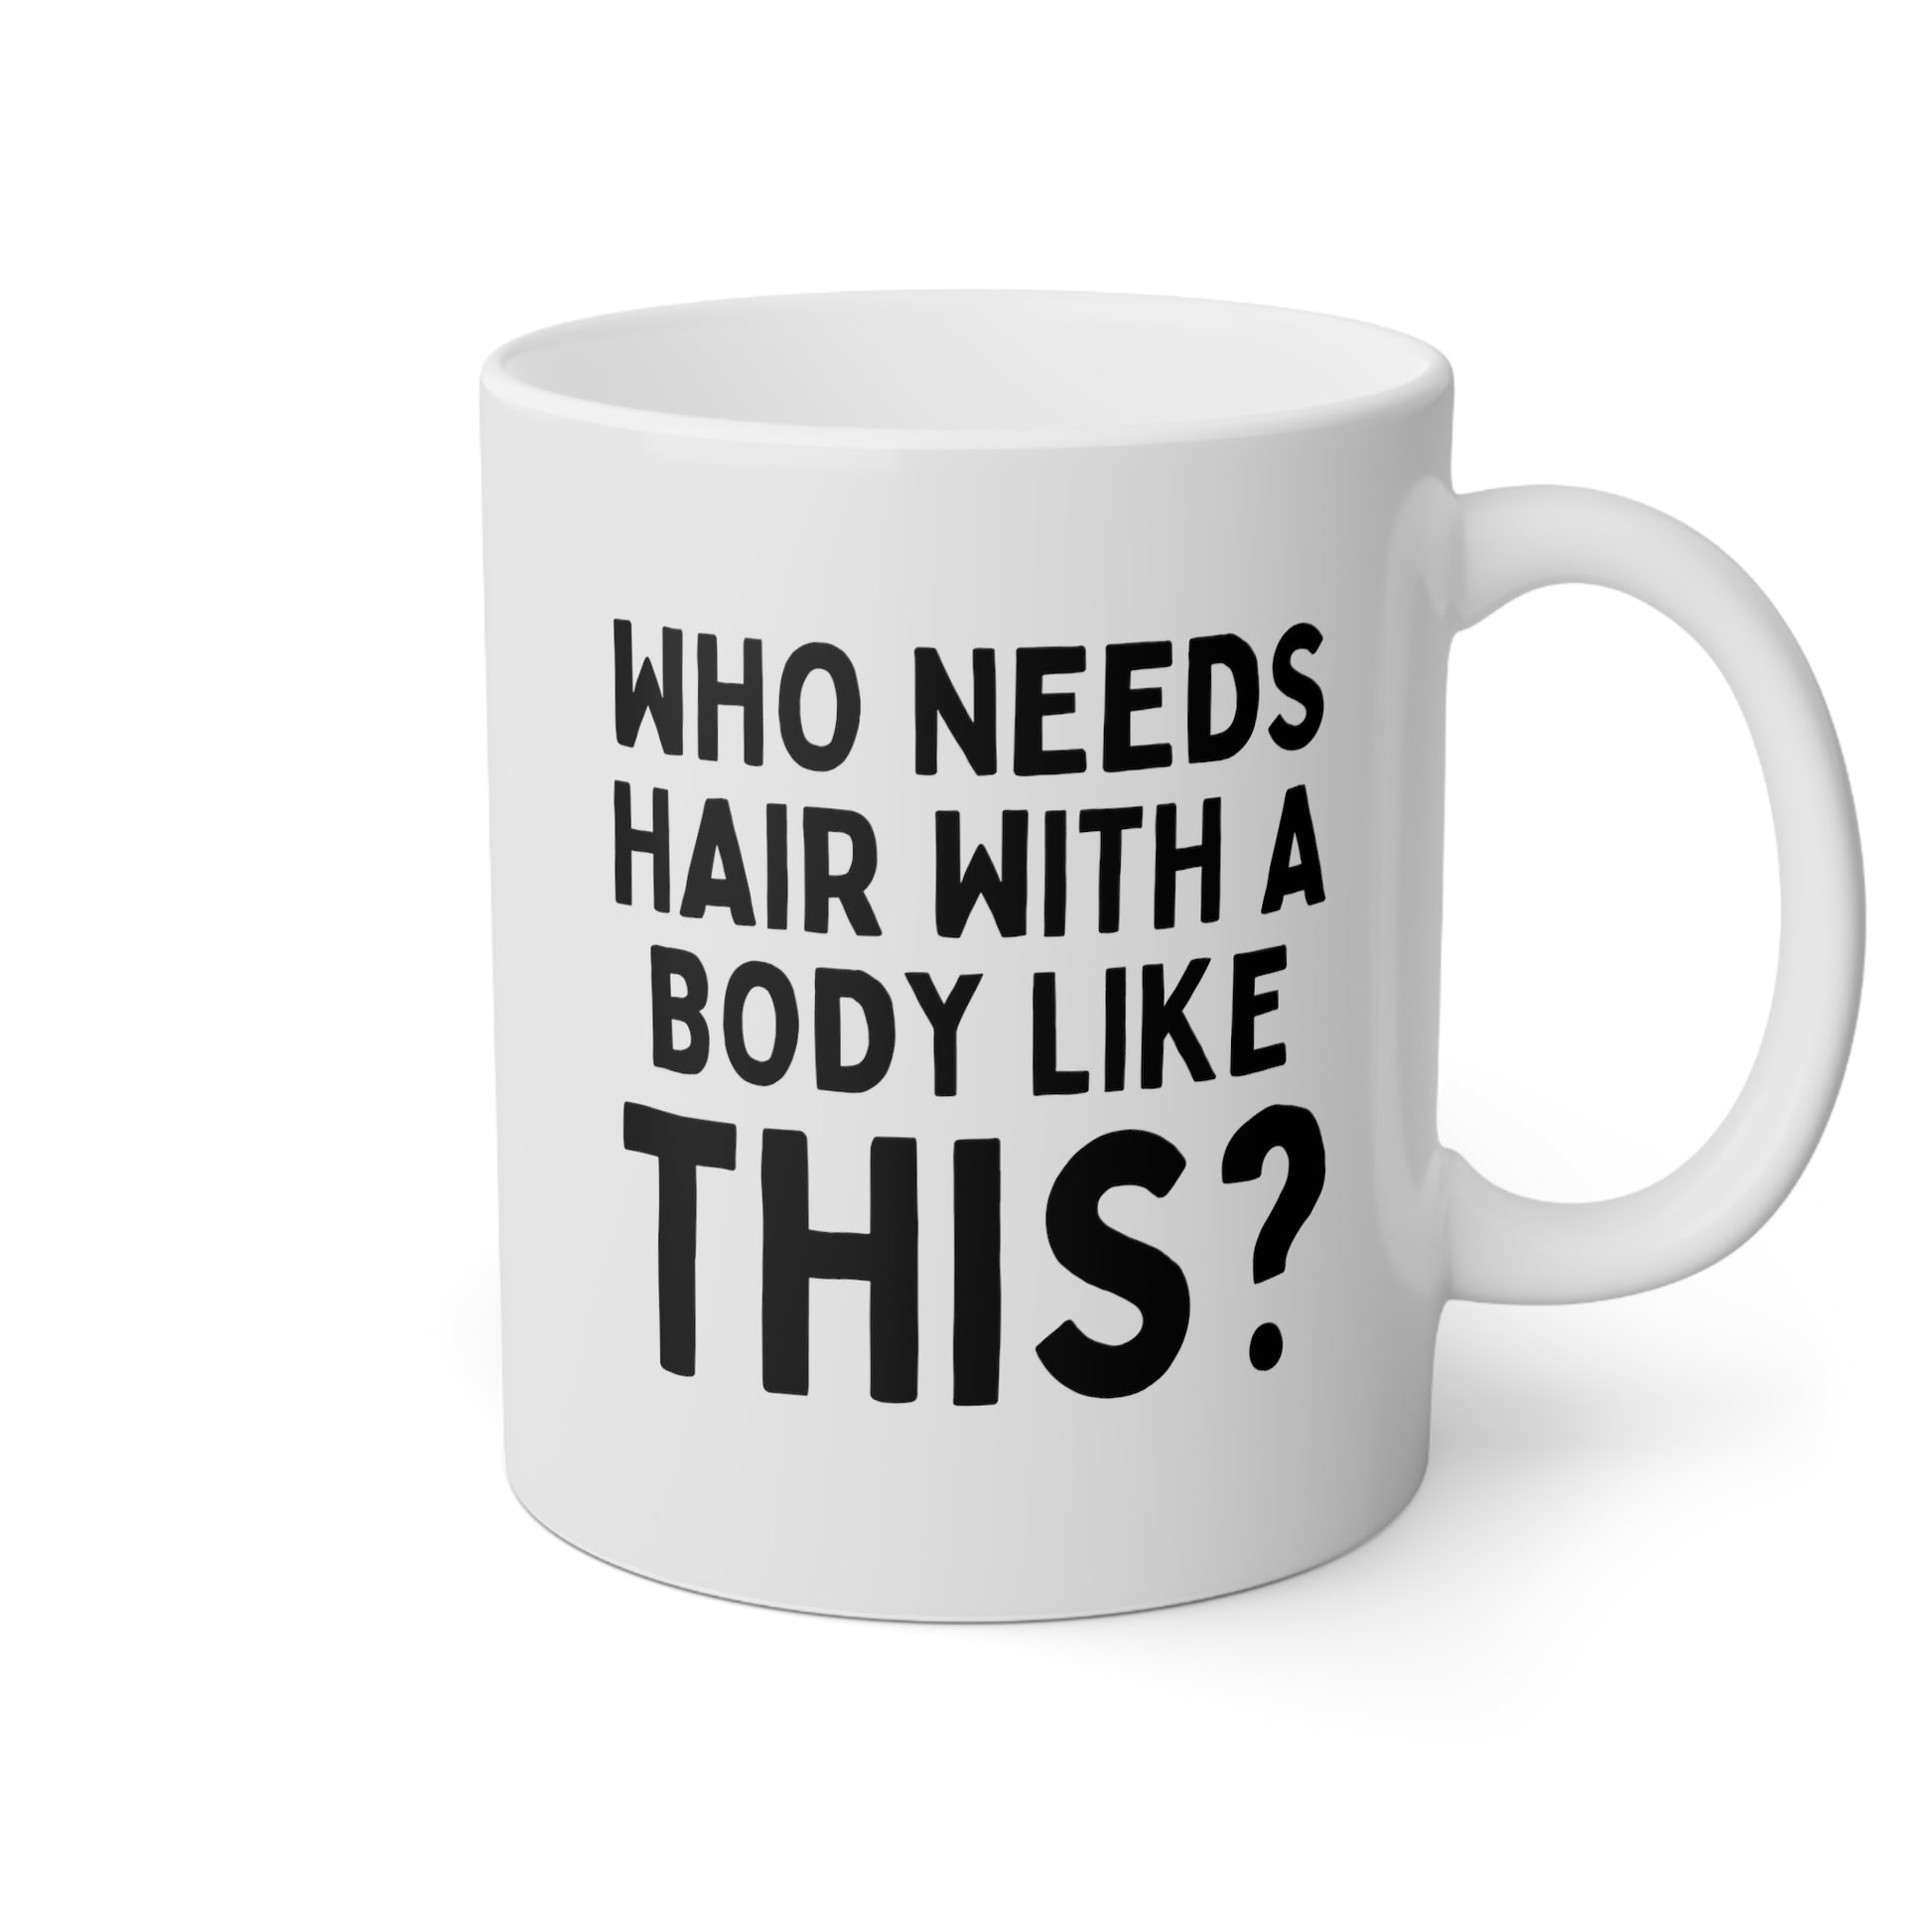 Who Needs Hair With a Body Like This 11oz white funny large coffee mug gift for bald men fathers day husband humor dad tea cup mens drinkware waveywares wavey wares wavywares wavy wares